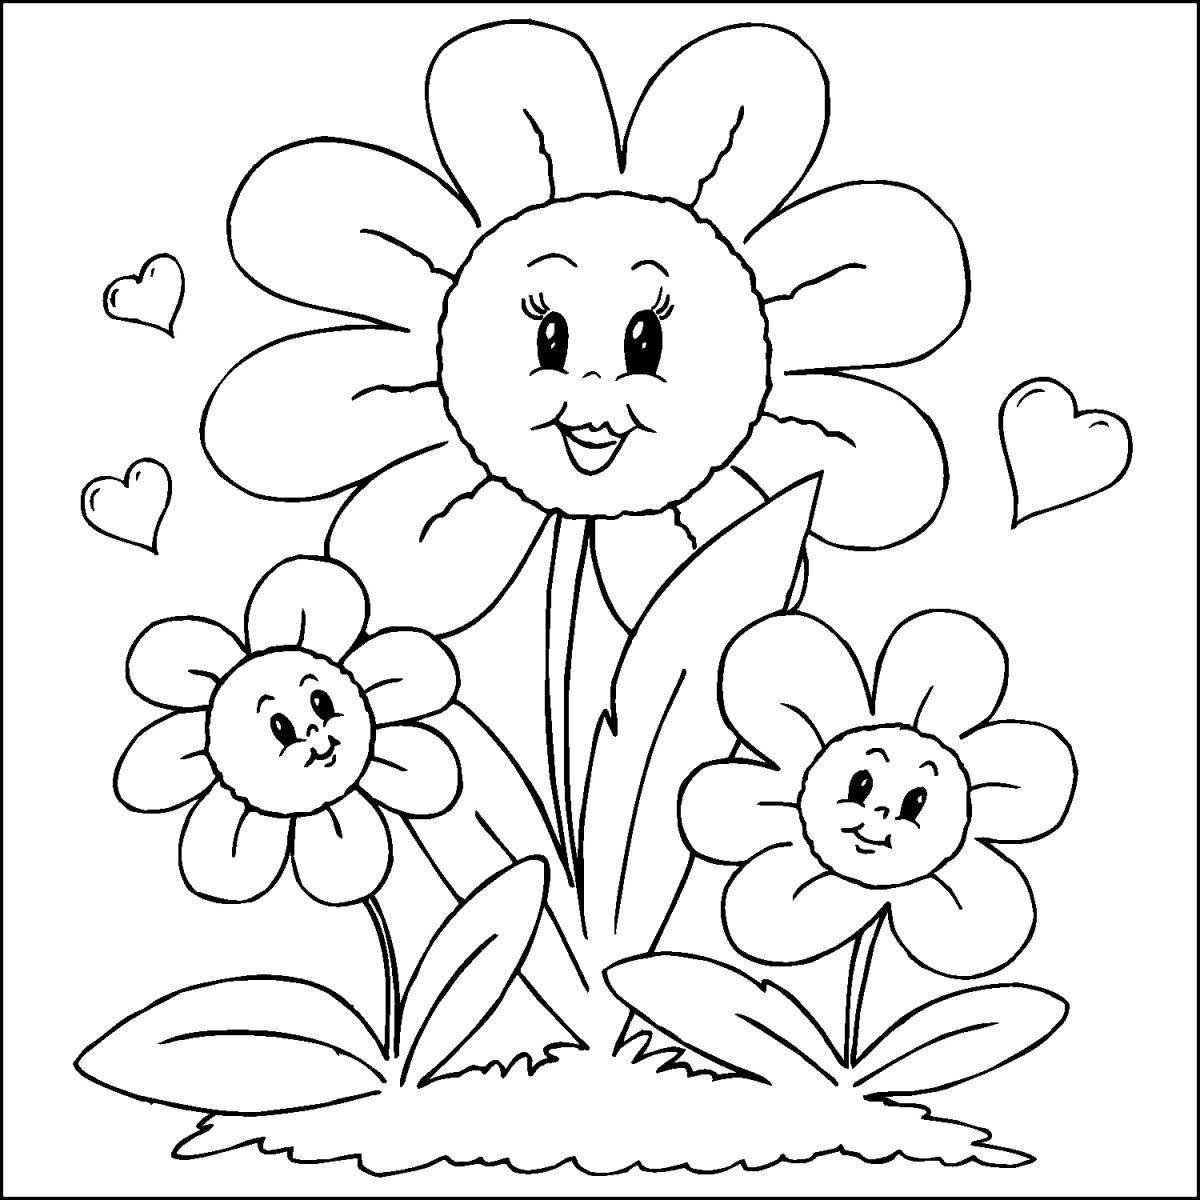 Sparkling flowers coloring book for children 4-5 years old